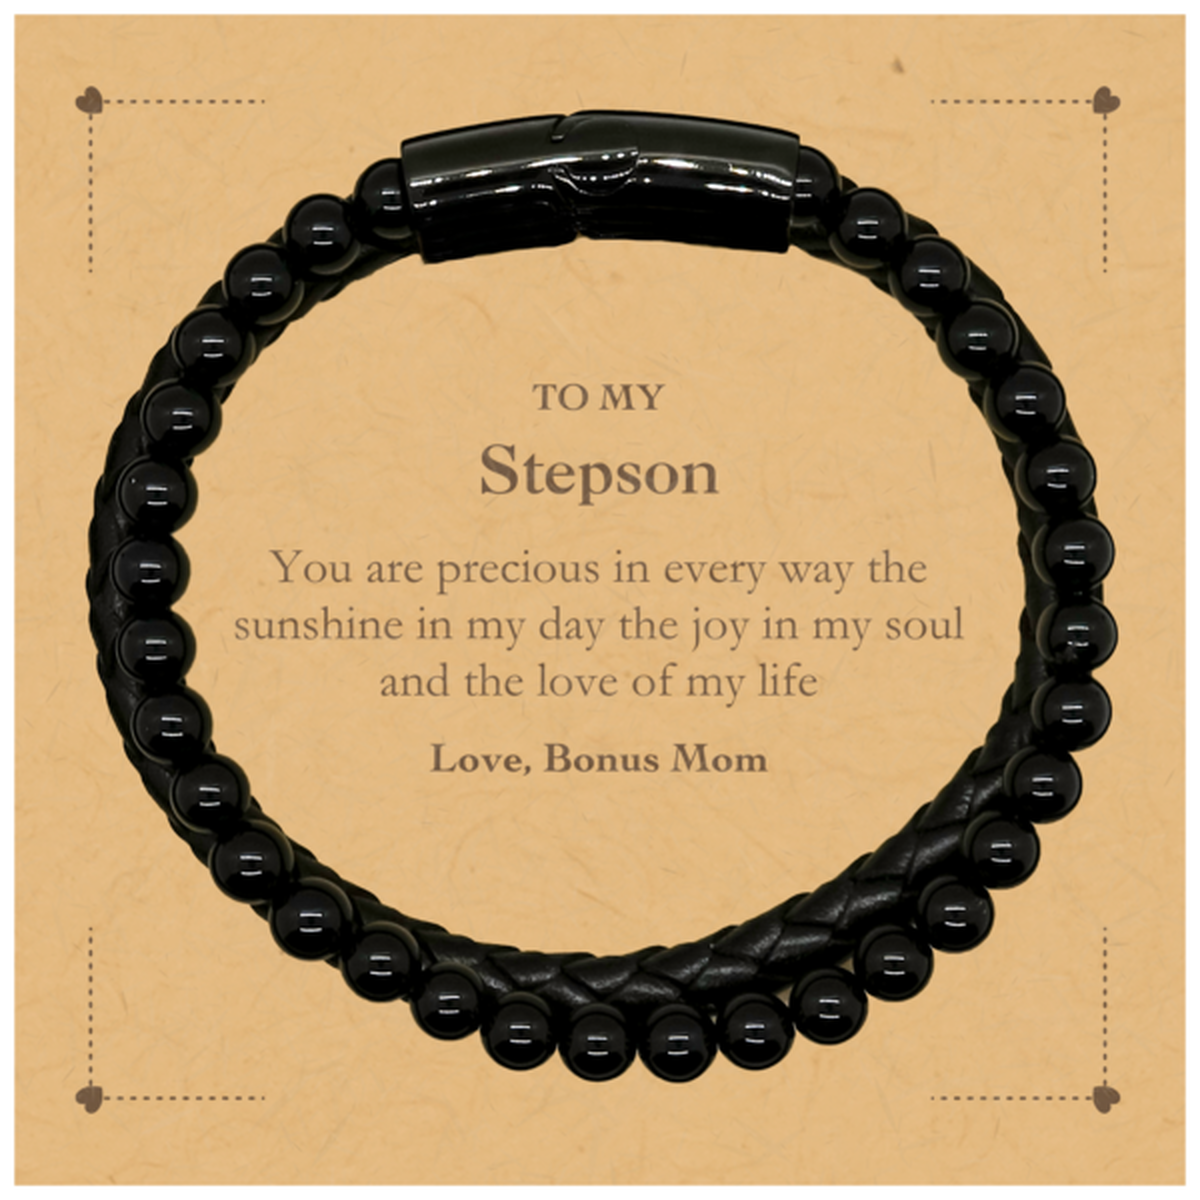 Graduation Gifts for Stepson Stone Leather Bracelets Present from Bonus Mom, Christmas Stepson Birthday Gifts Stepson You are precious in every way the sunshine in my day. Love, Bonus Mom